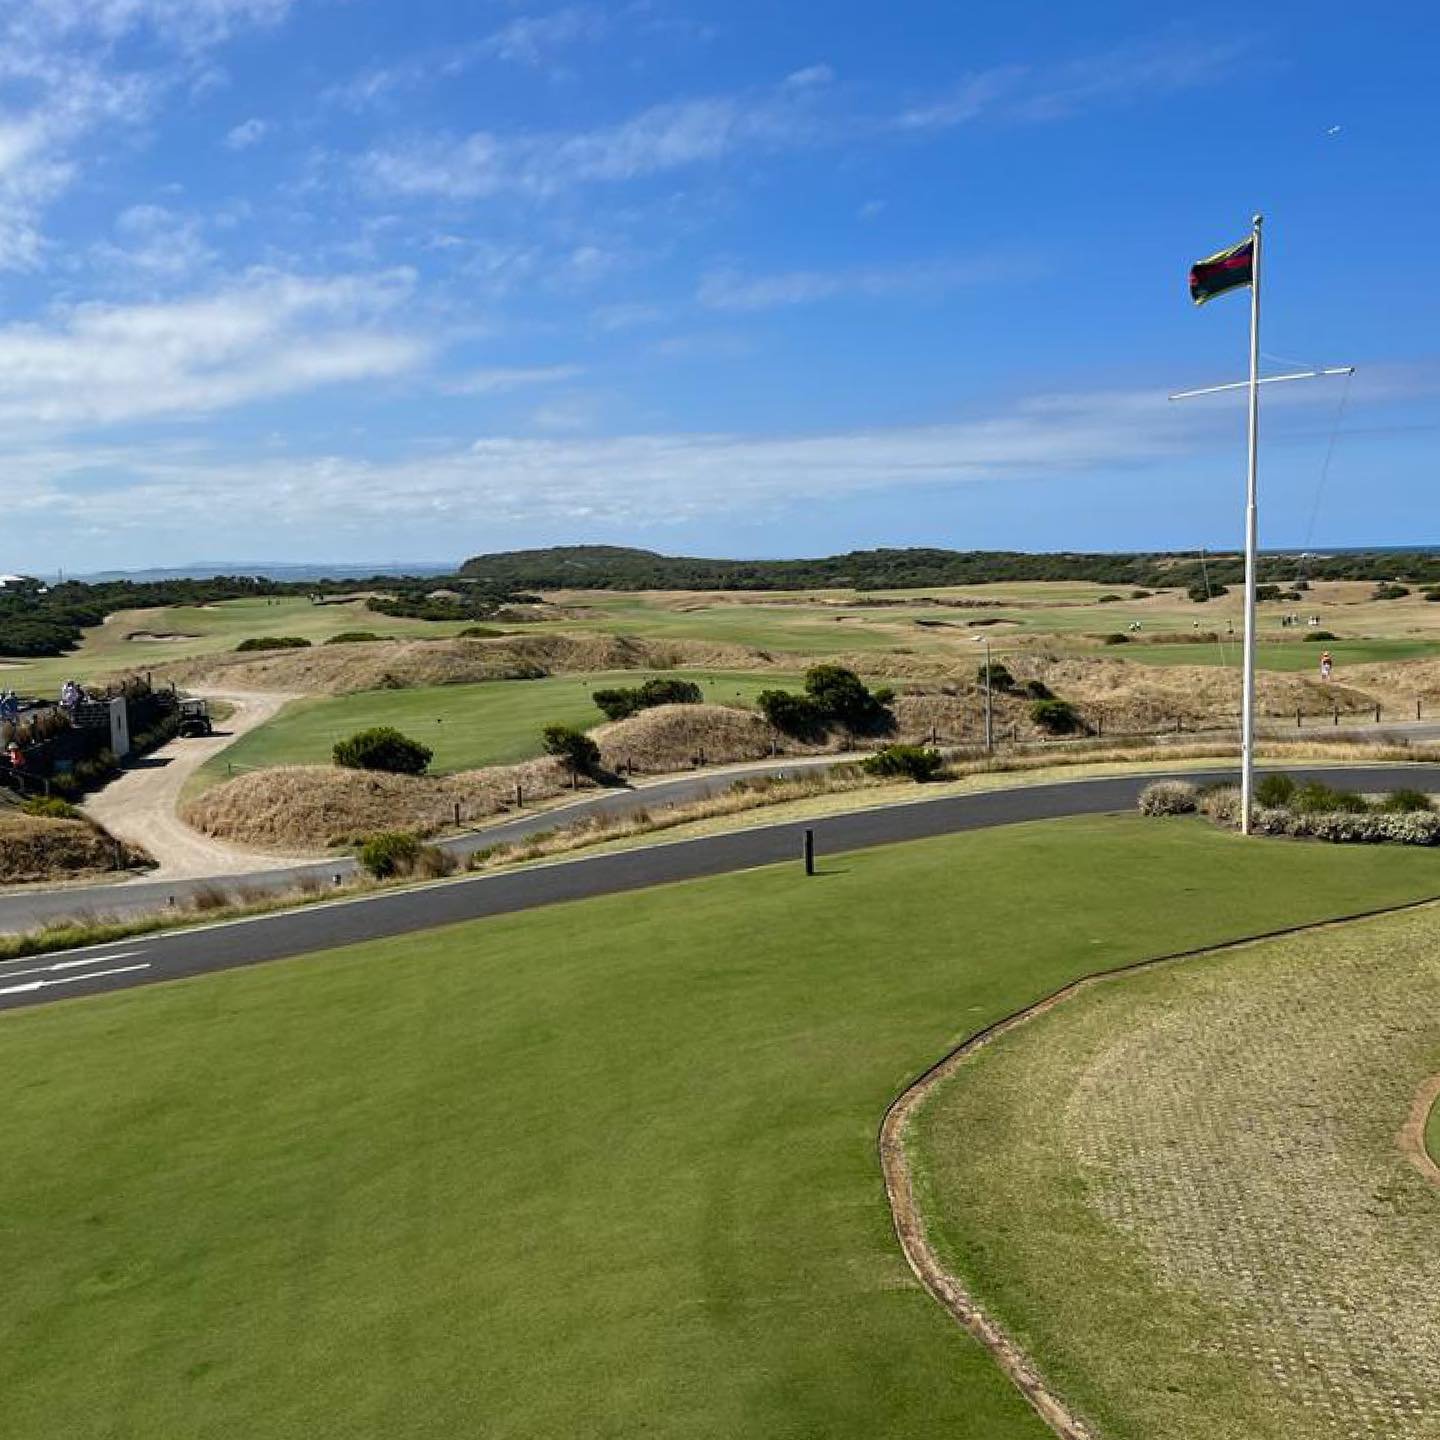 As Australia&rsquo;s best golfers prepare for @themasters our team has been refining our interior design for one of Australia&rsquo;s most loved clubhouses, the century old @barwonheadsgolfclub